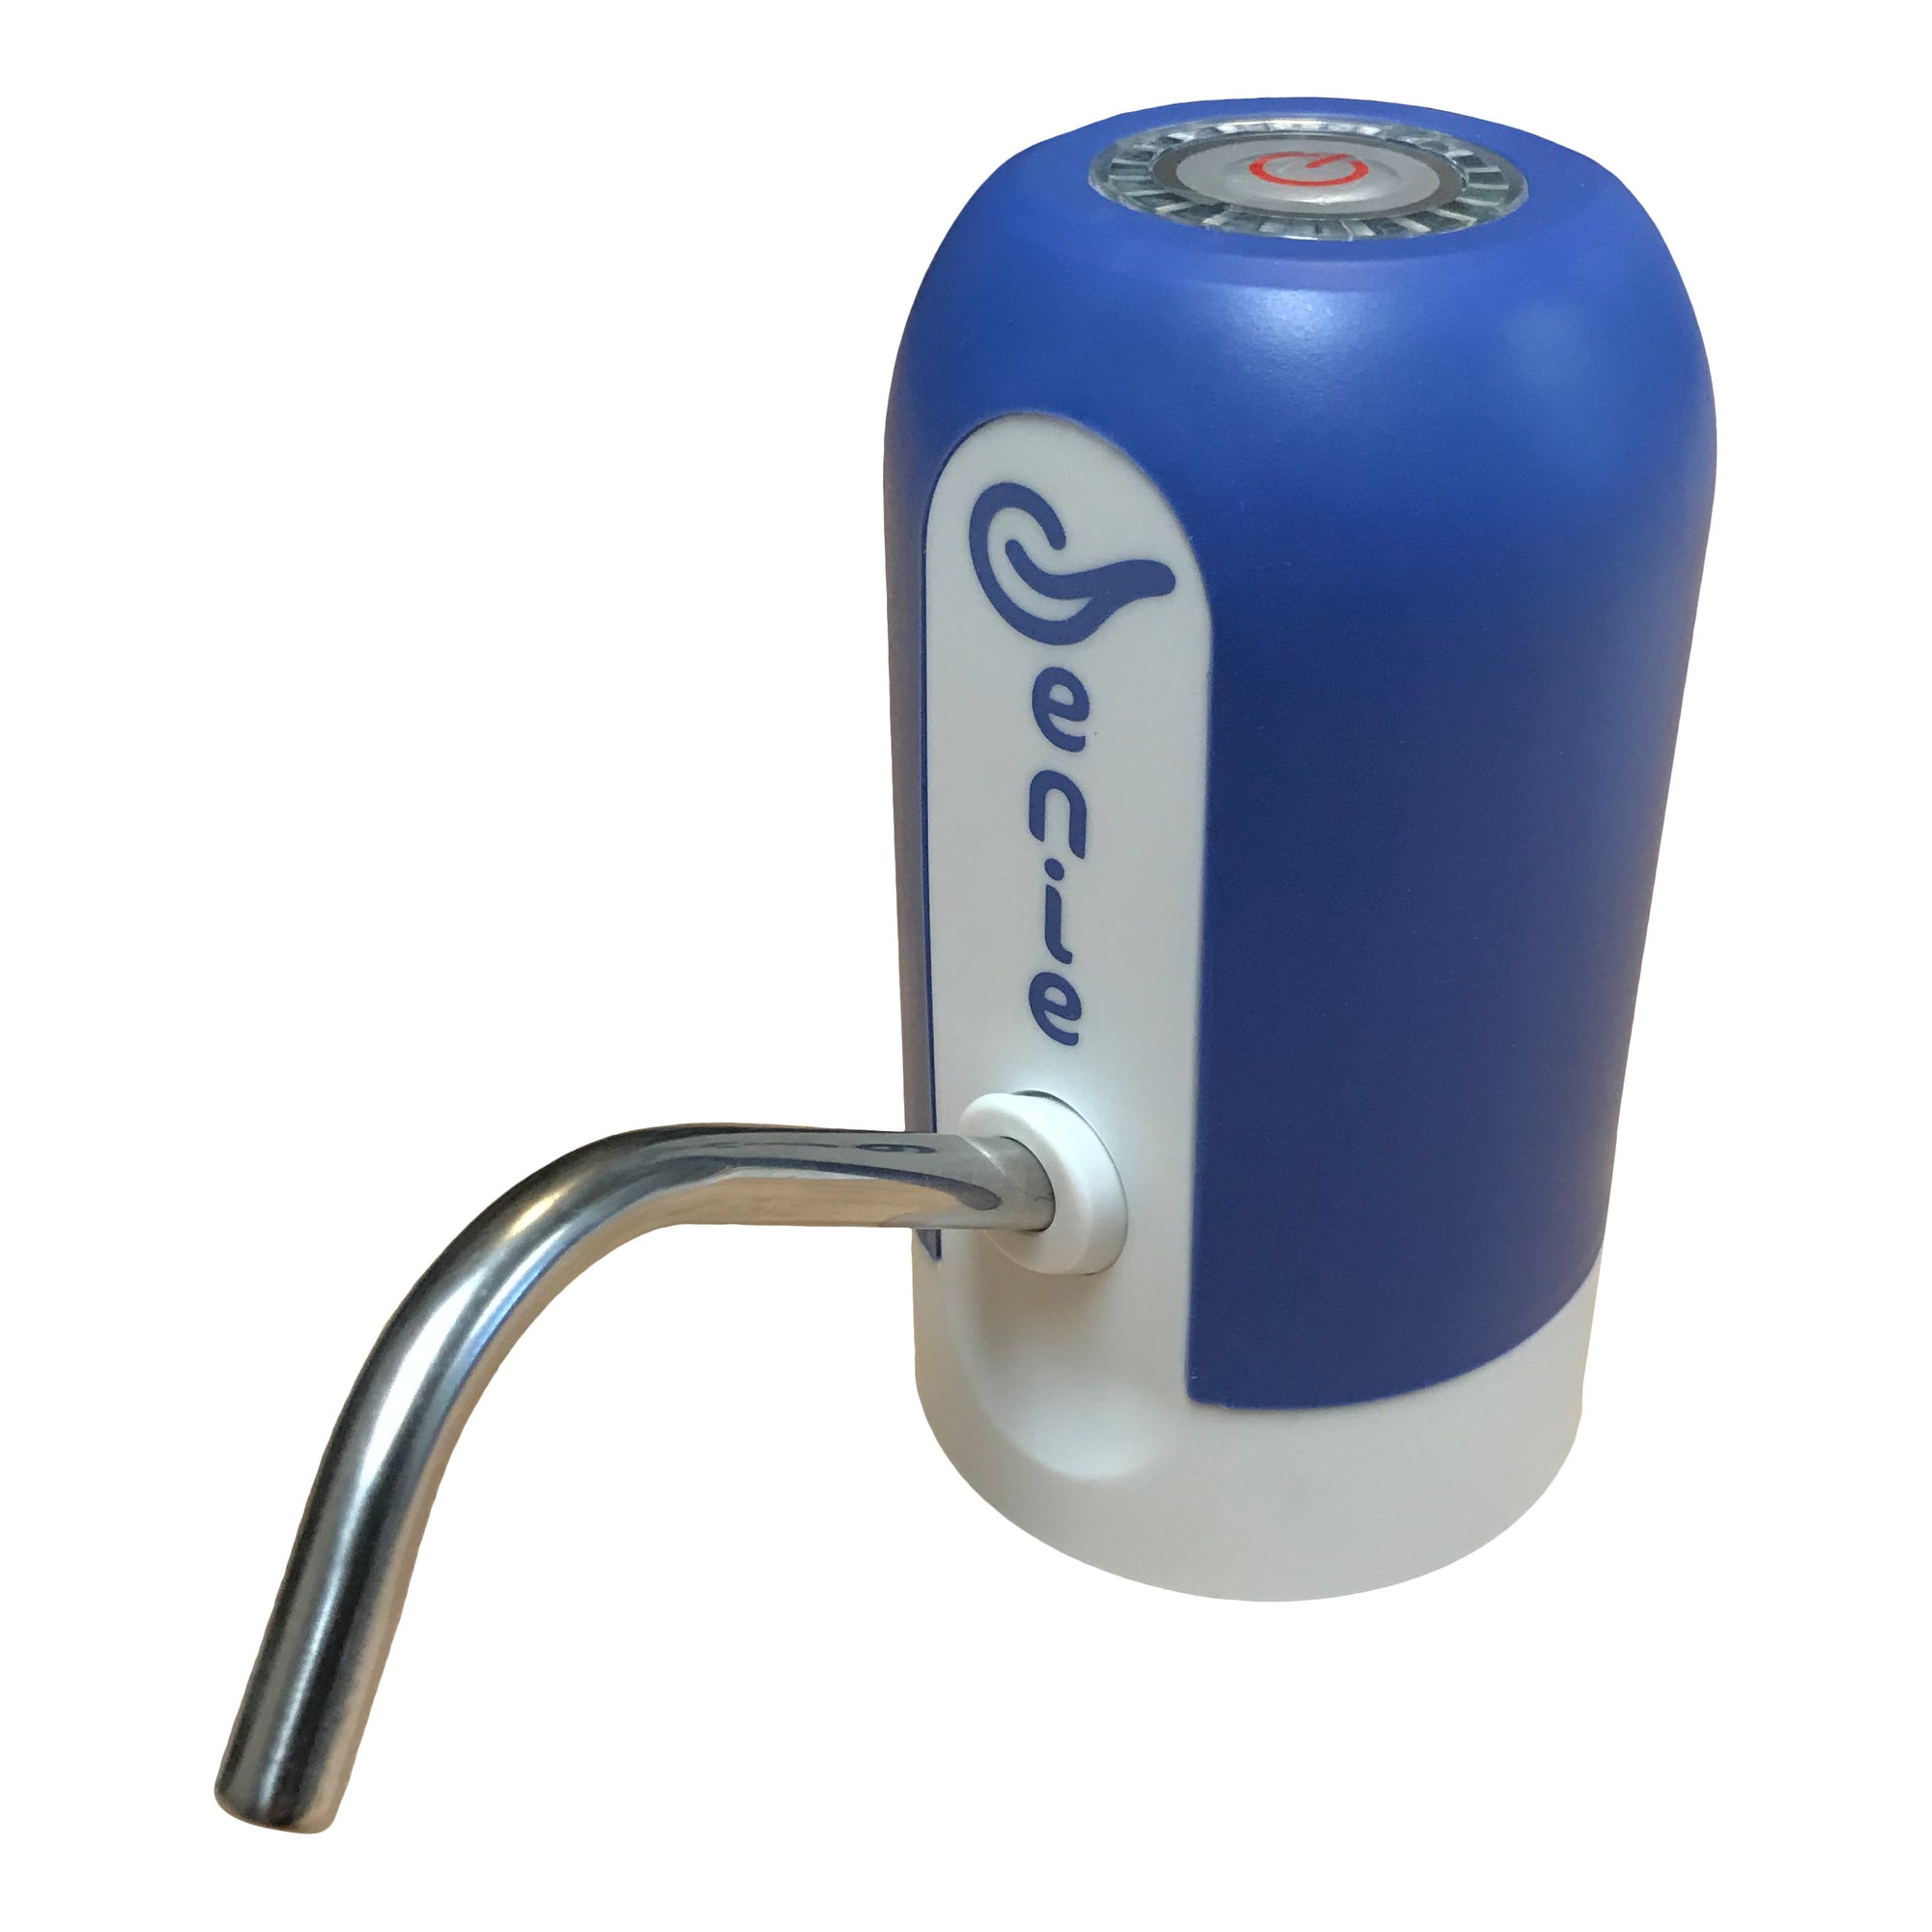 Genie Rechargeable Automatic Water Jug Pump